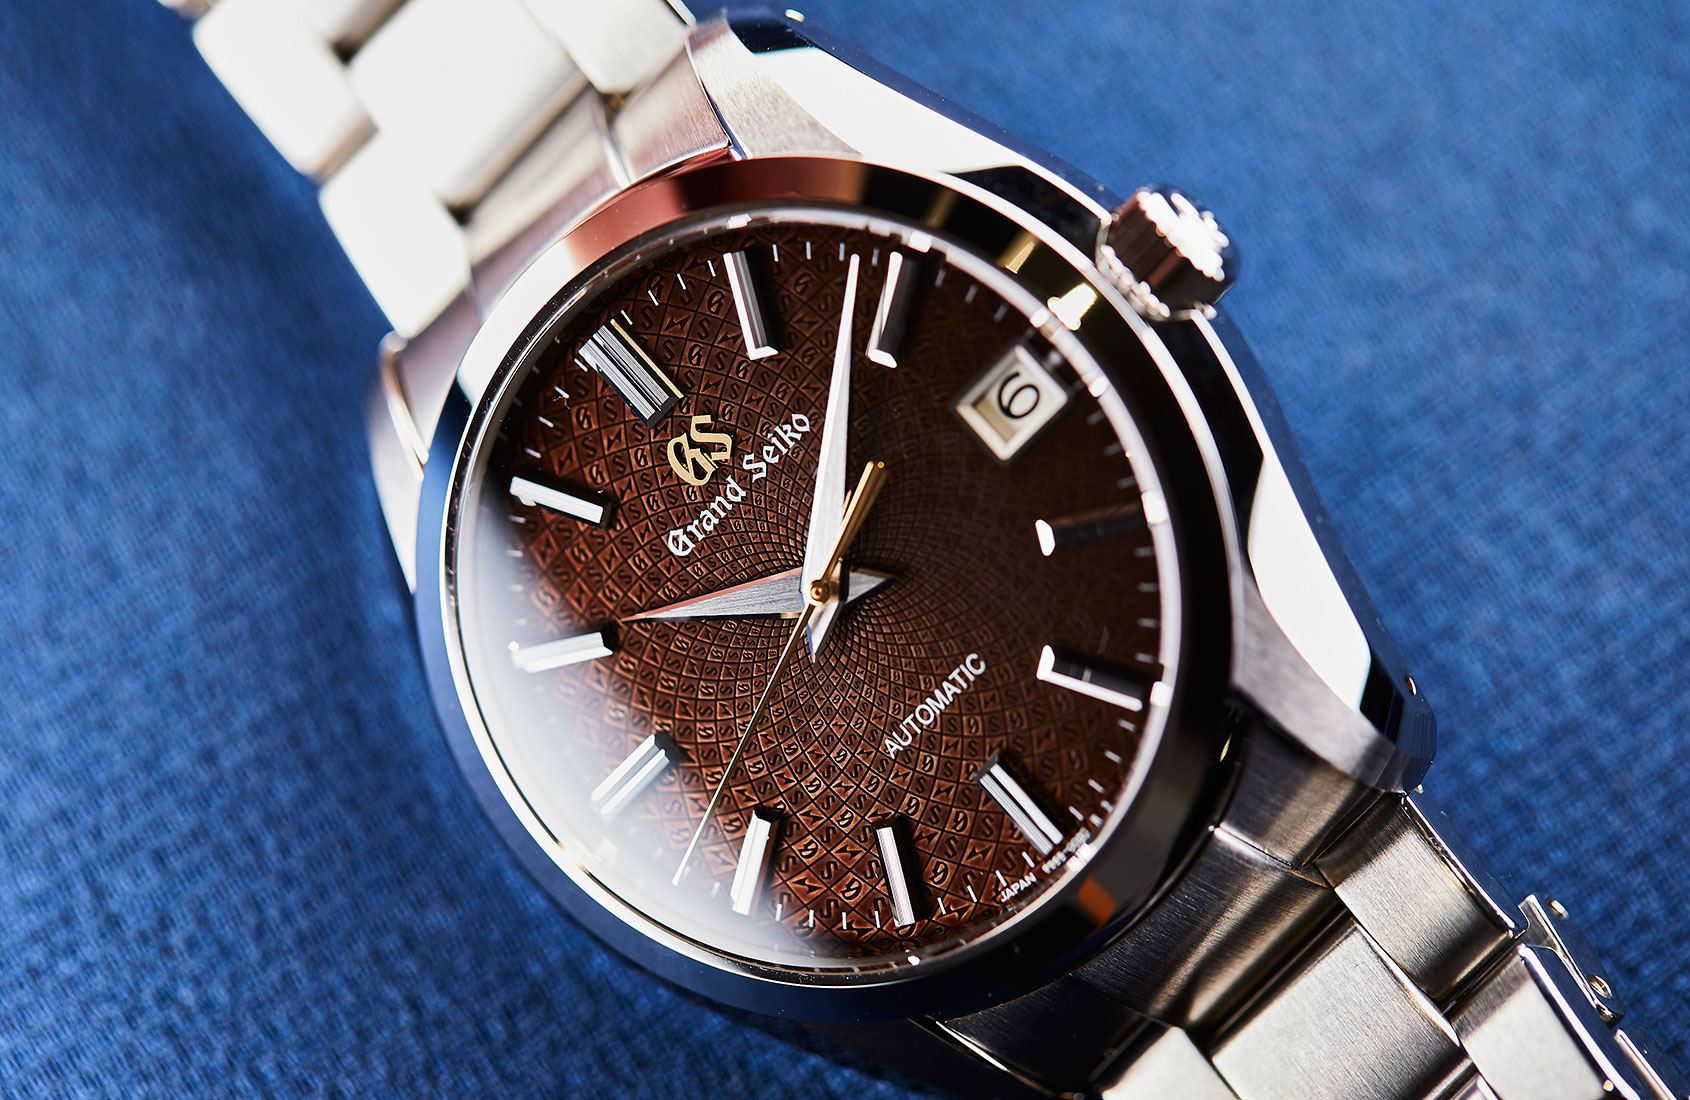 HANDS-ON: The Grand Seiko SBGR311 Limited Edition – celebrating 20